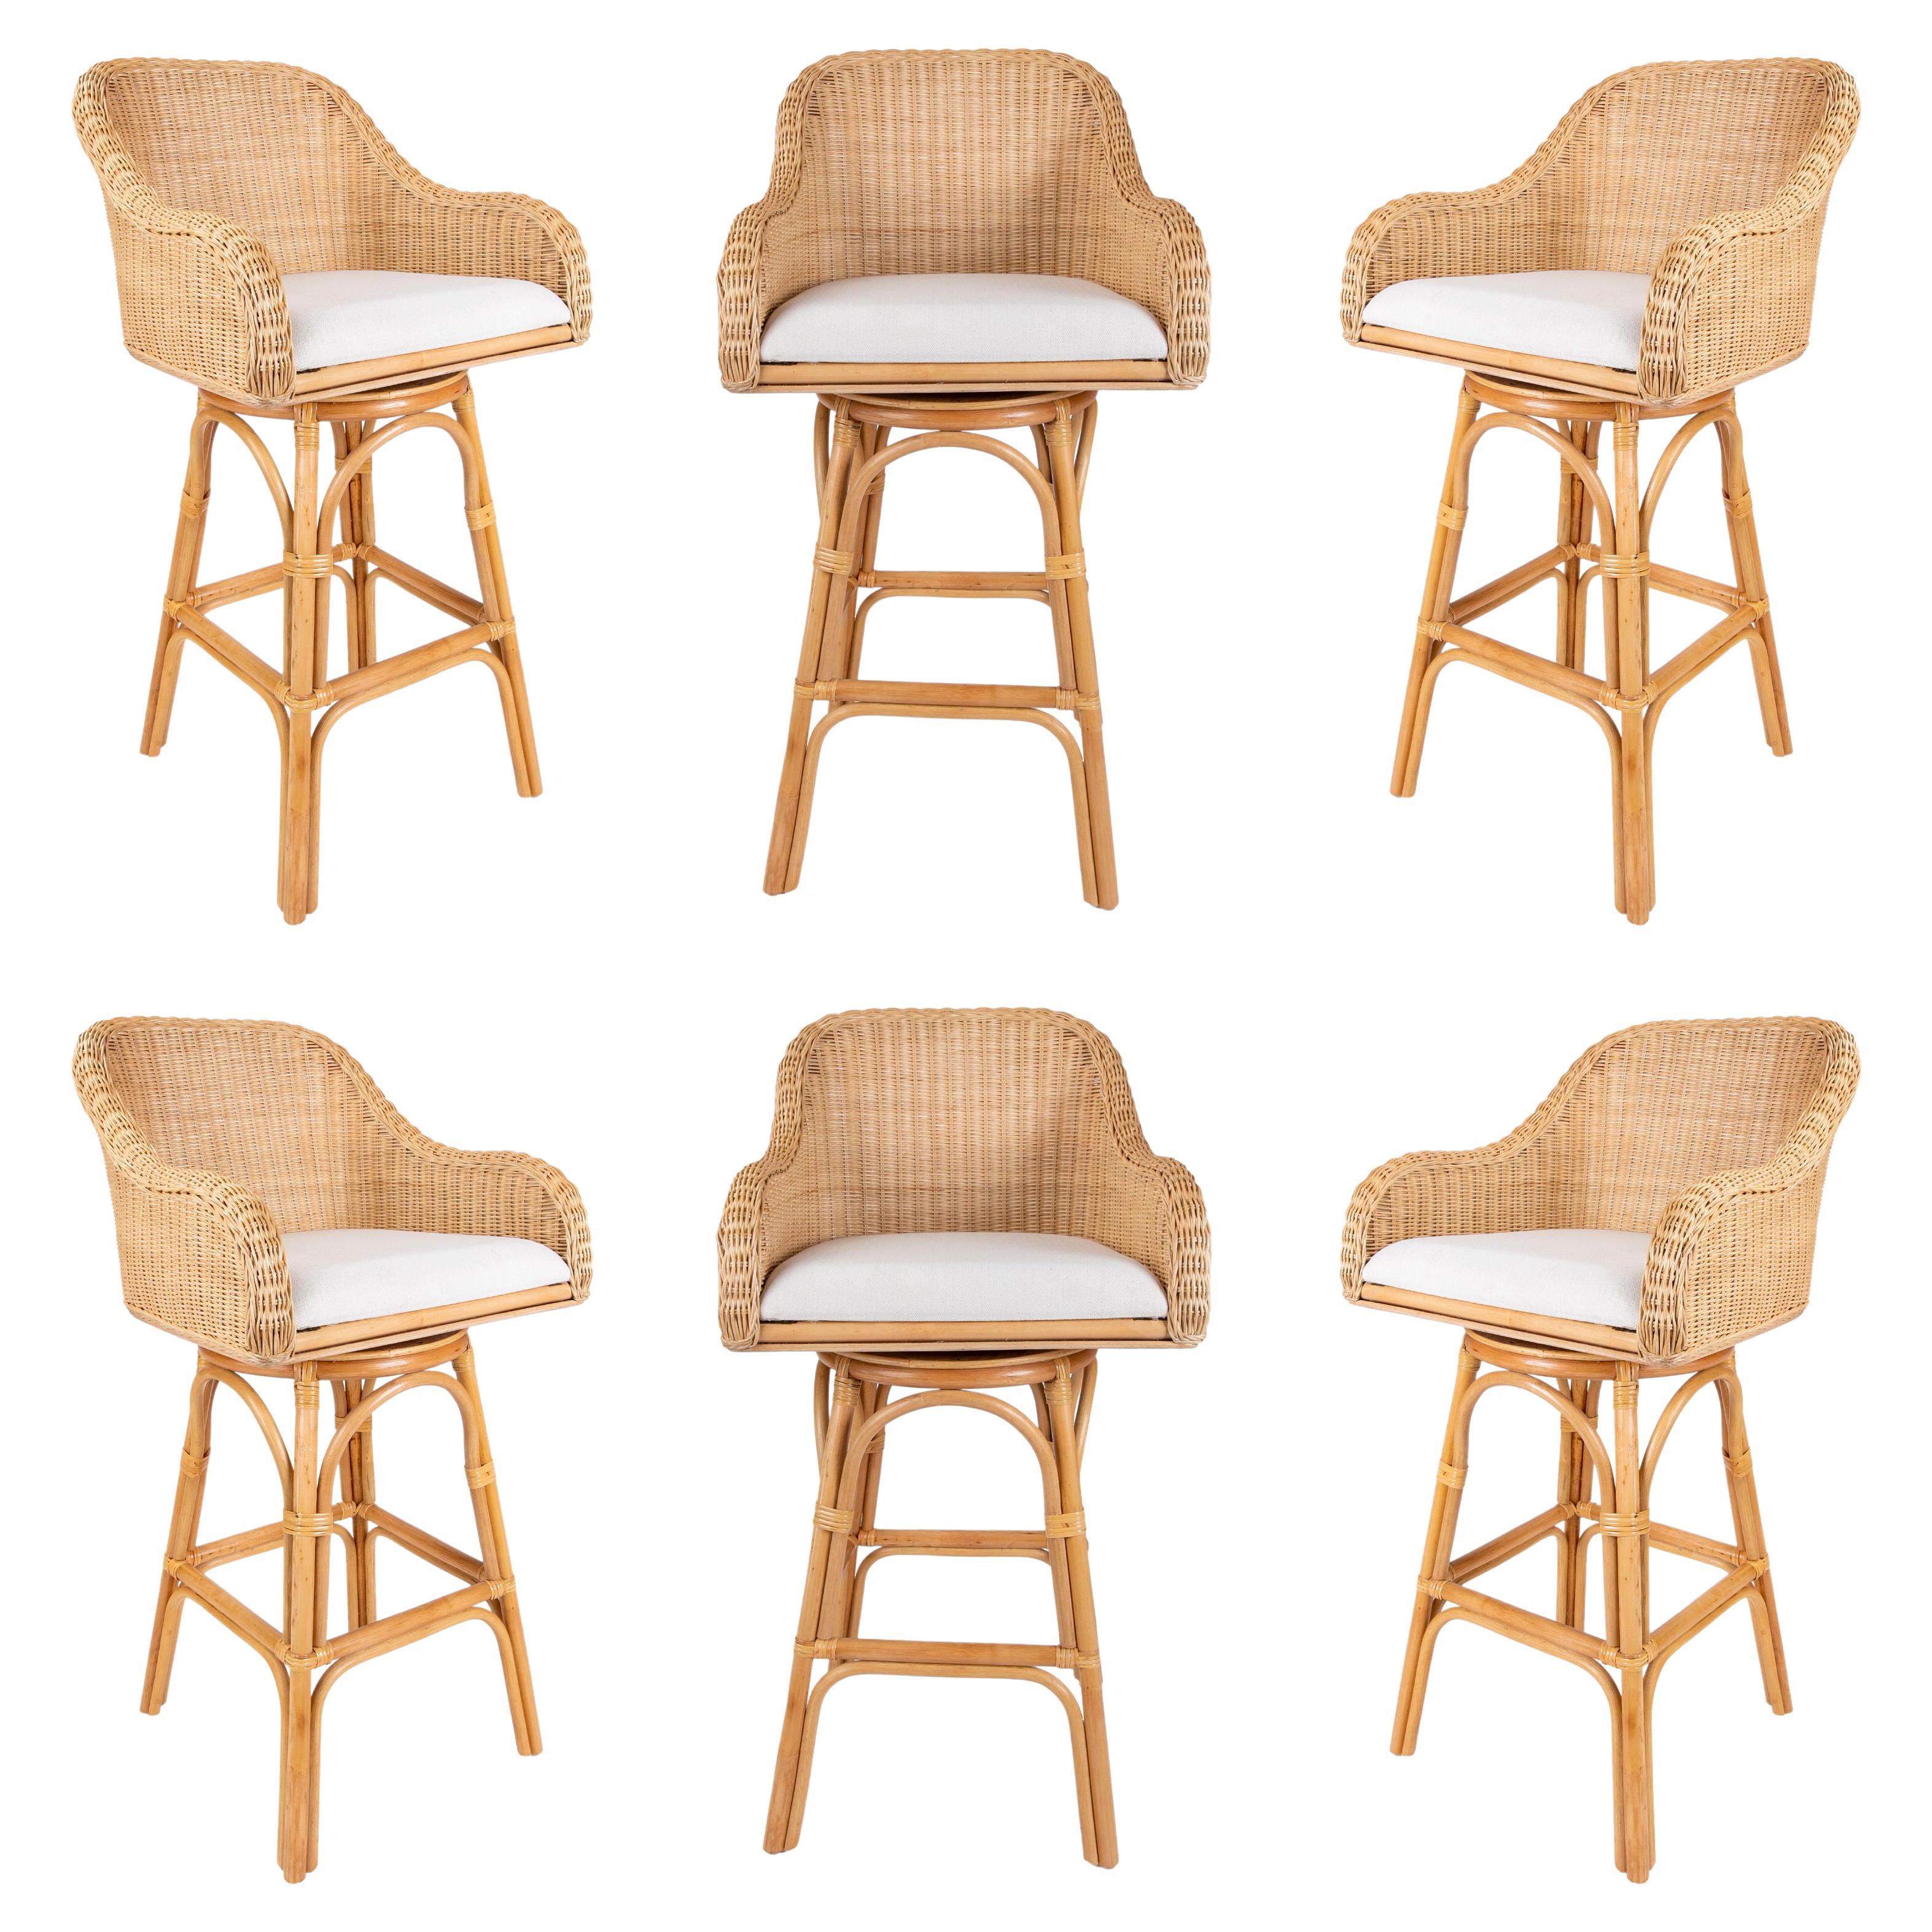 Set of Six Upholstered Rattan and Wicker Bar stools with Movement